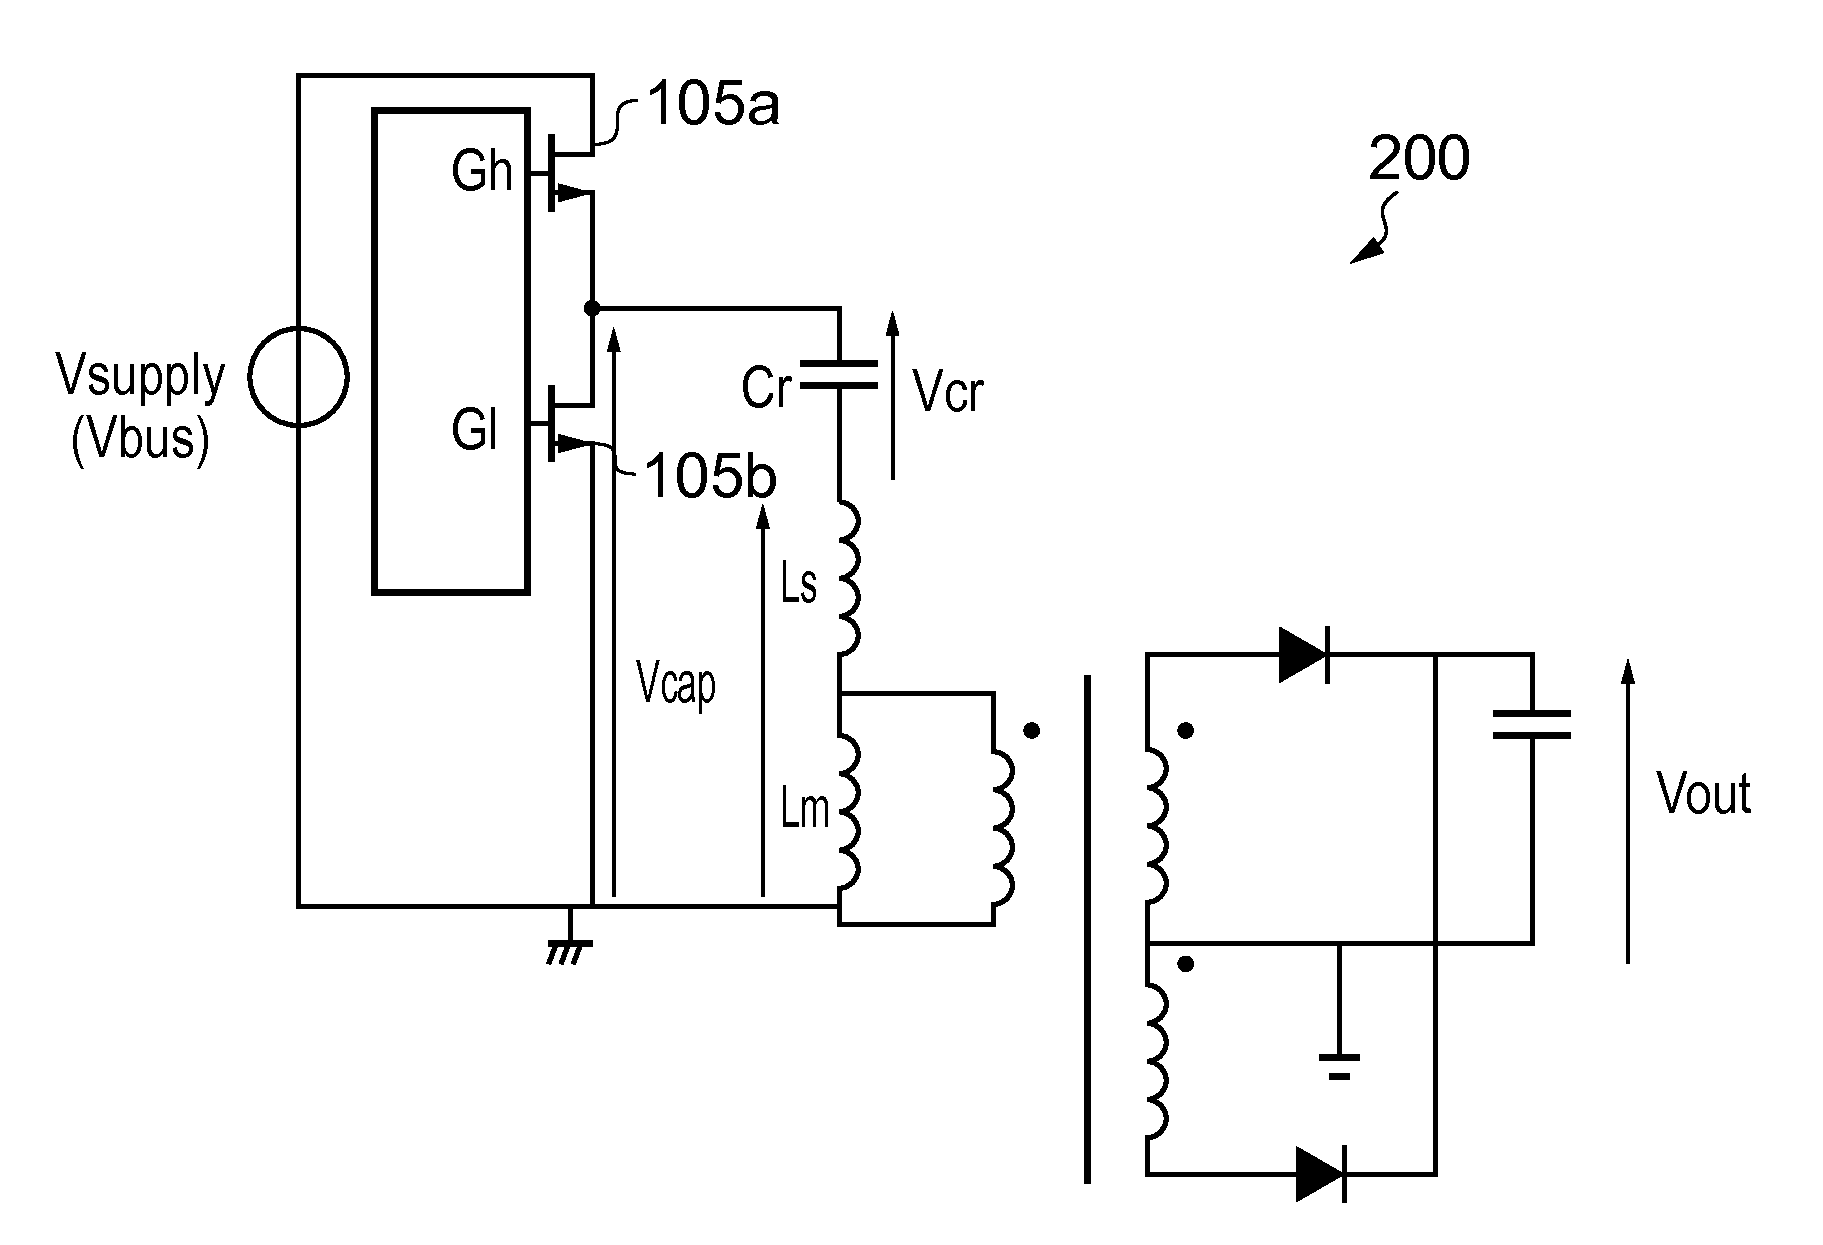 Resonant converter control based on a voltage difference